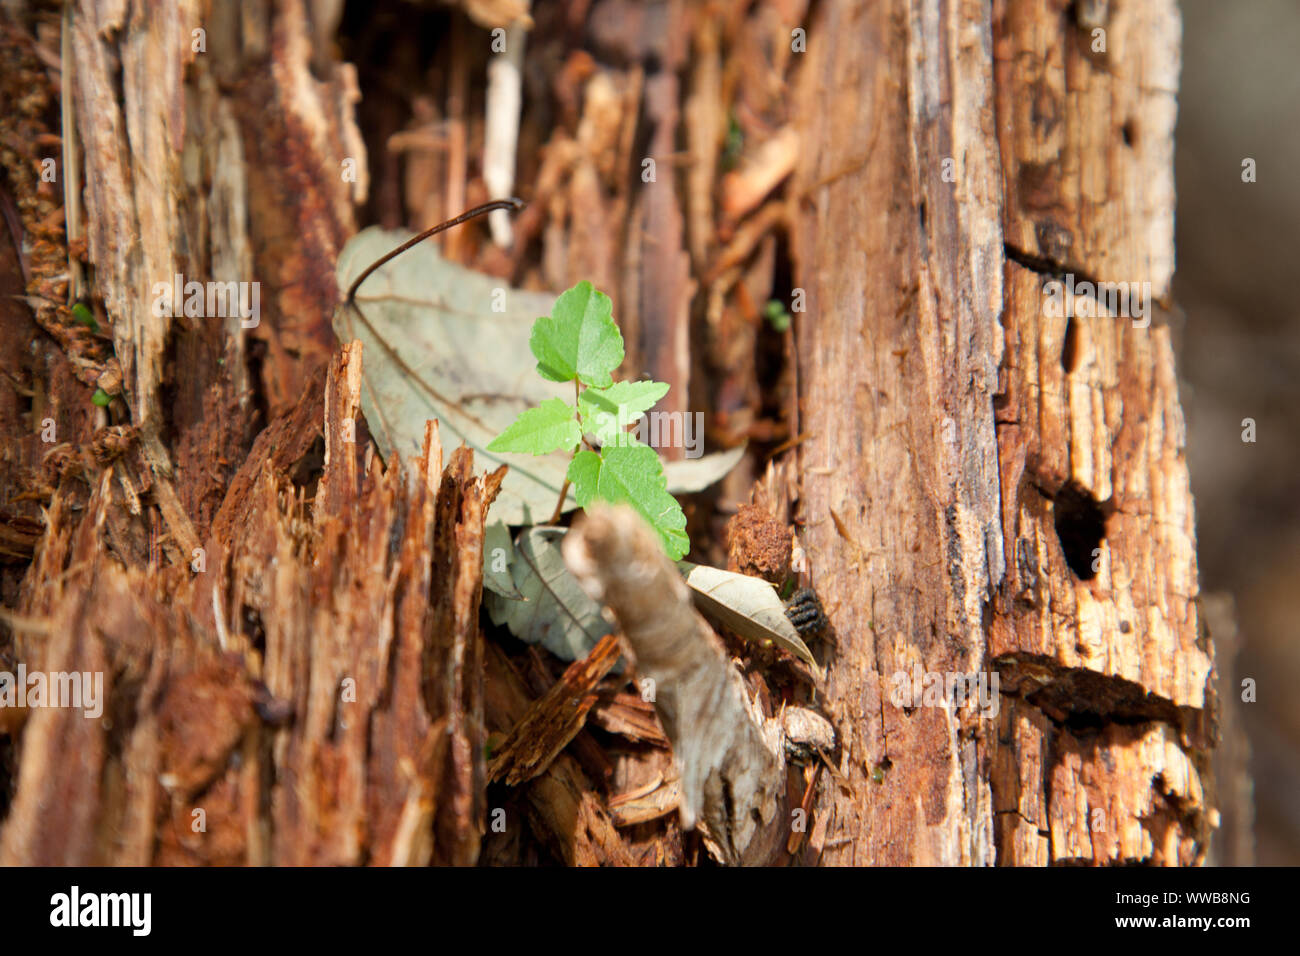 A small green plant grows inside the bark of an old tree outside with copy space Stock Photo